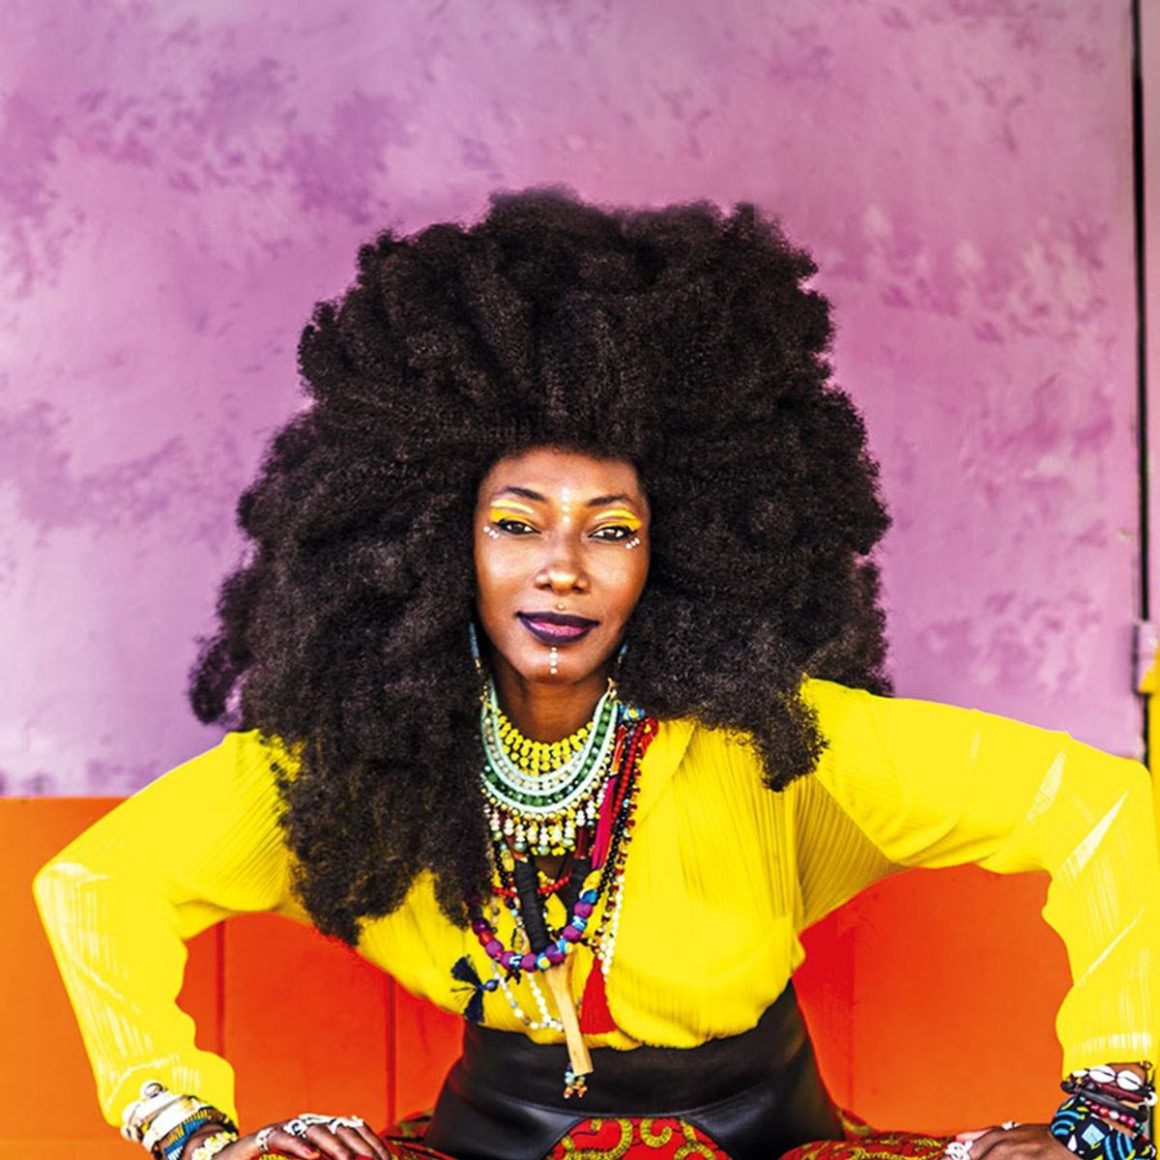 Fatoumata Diawara is undoubtedly one of the most influential artists in Africa and the world.